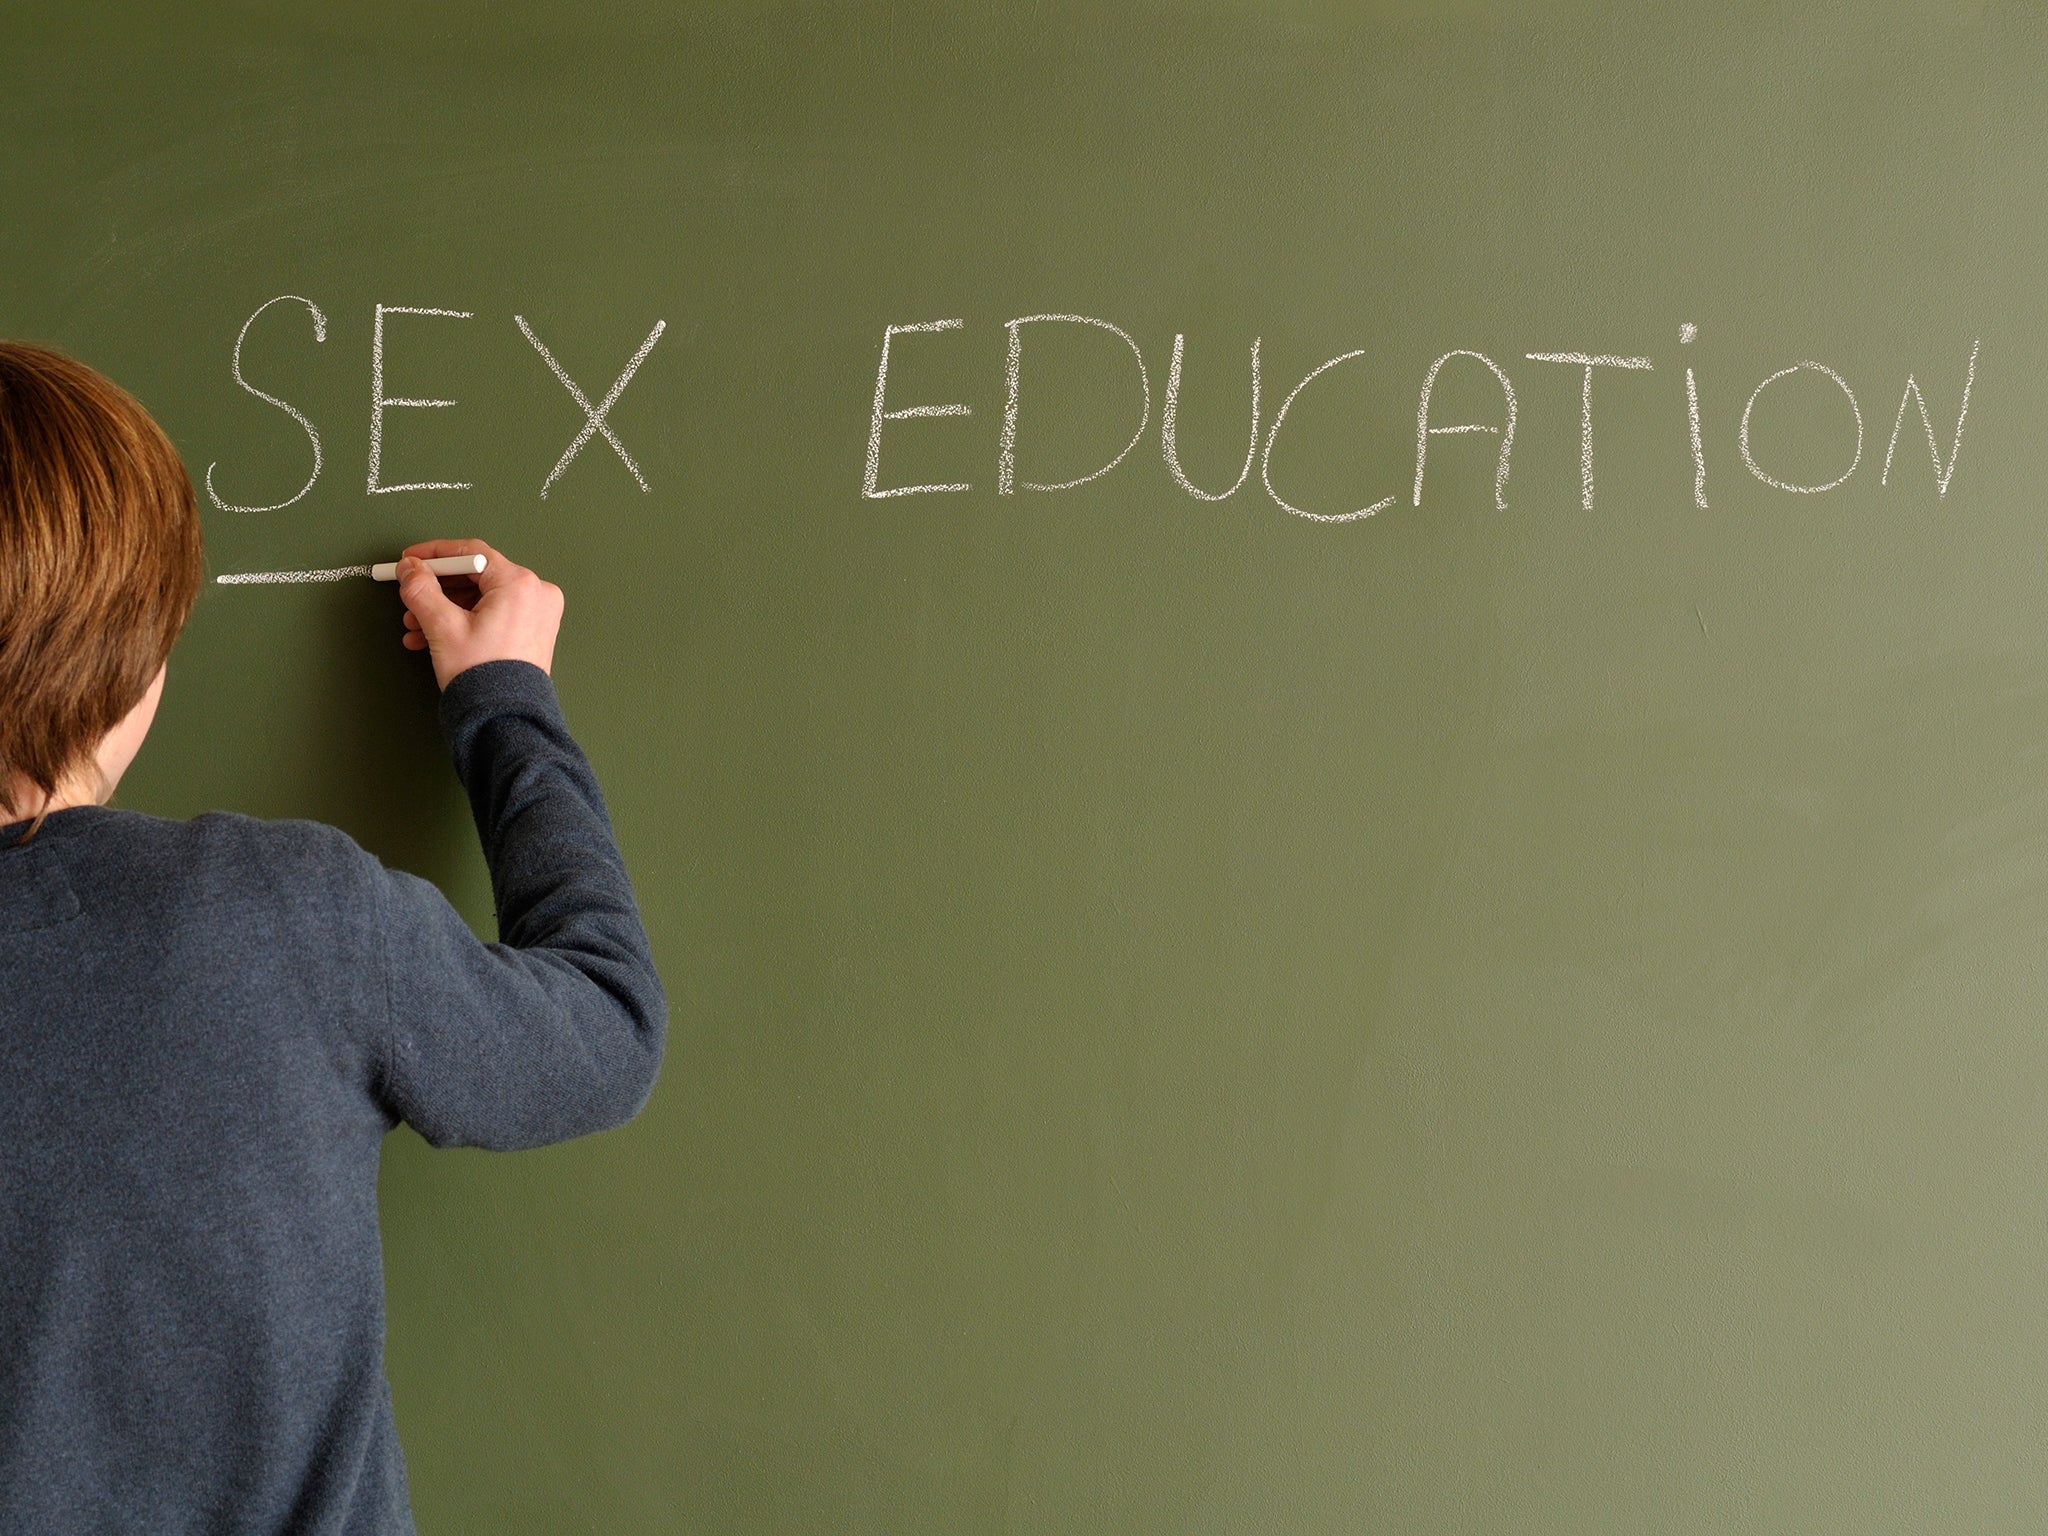 The education select committee concluded that better PSHE (personal, social health and economic education) and SRE (sex and relationships education) has the potential to help efforts to address many ‘problems’ in society